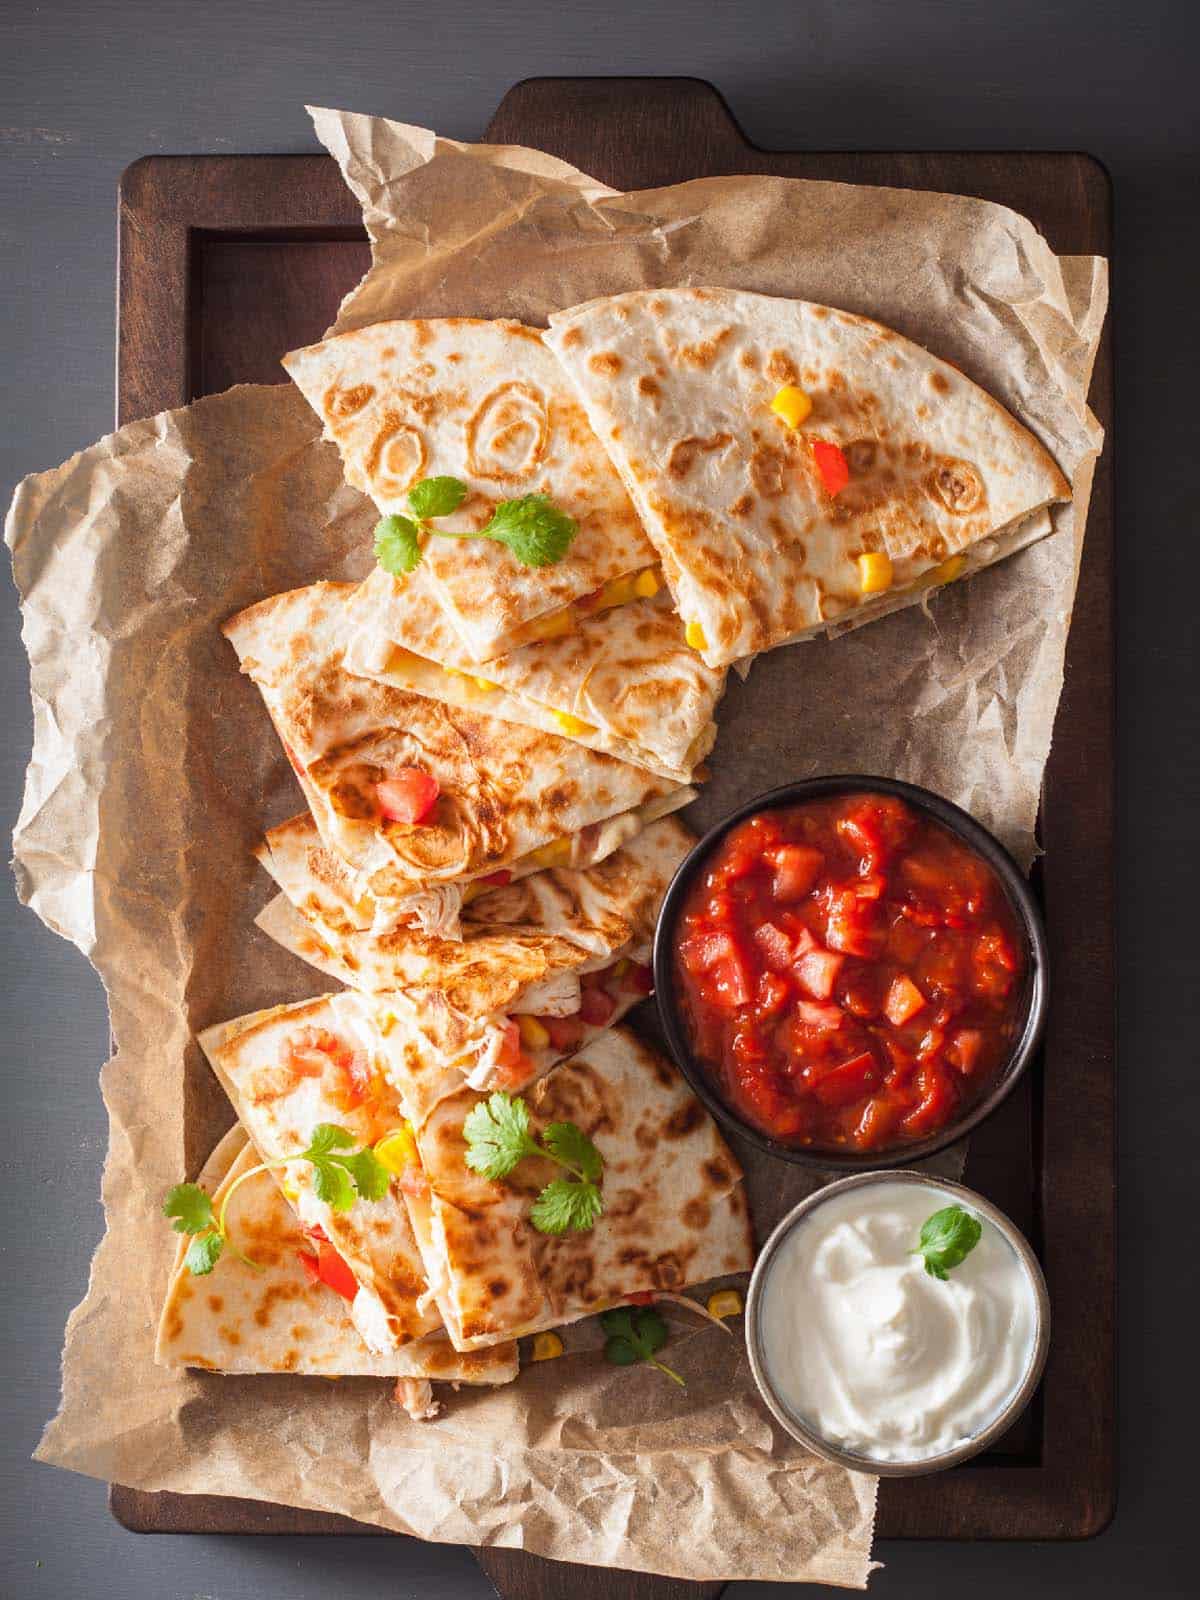 When it comes to Mexican cuisine, two popular items always seem to be up for debate: fajitas and quesadillas. Both are tasty options, but which one is better?